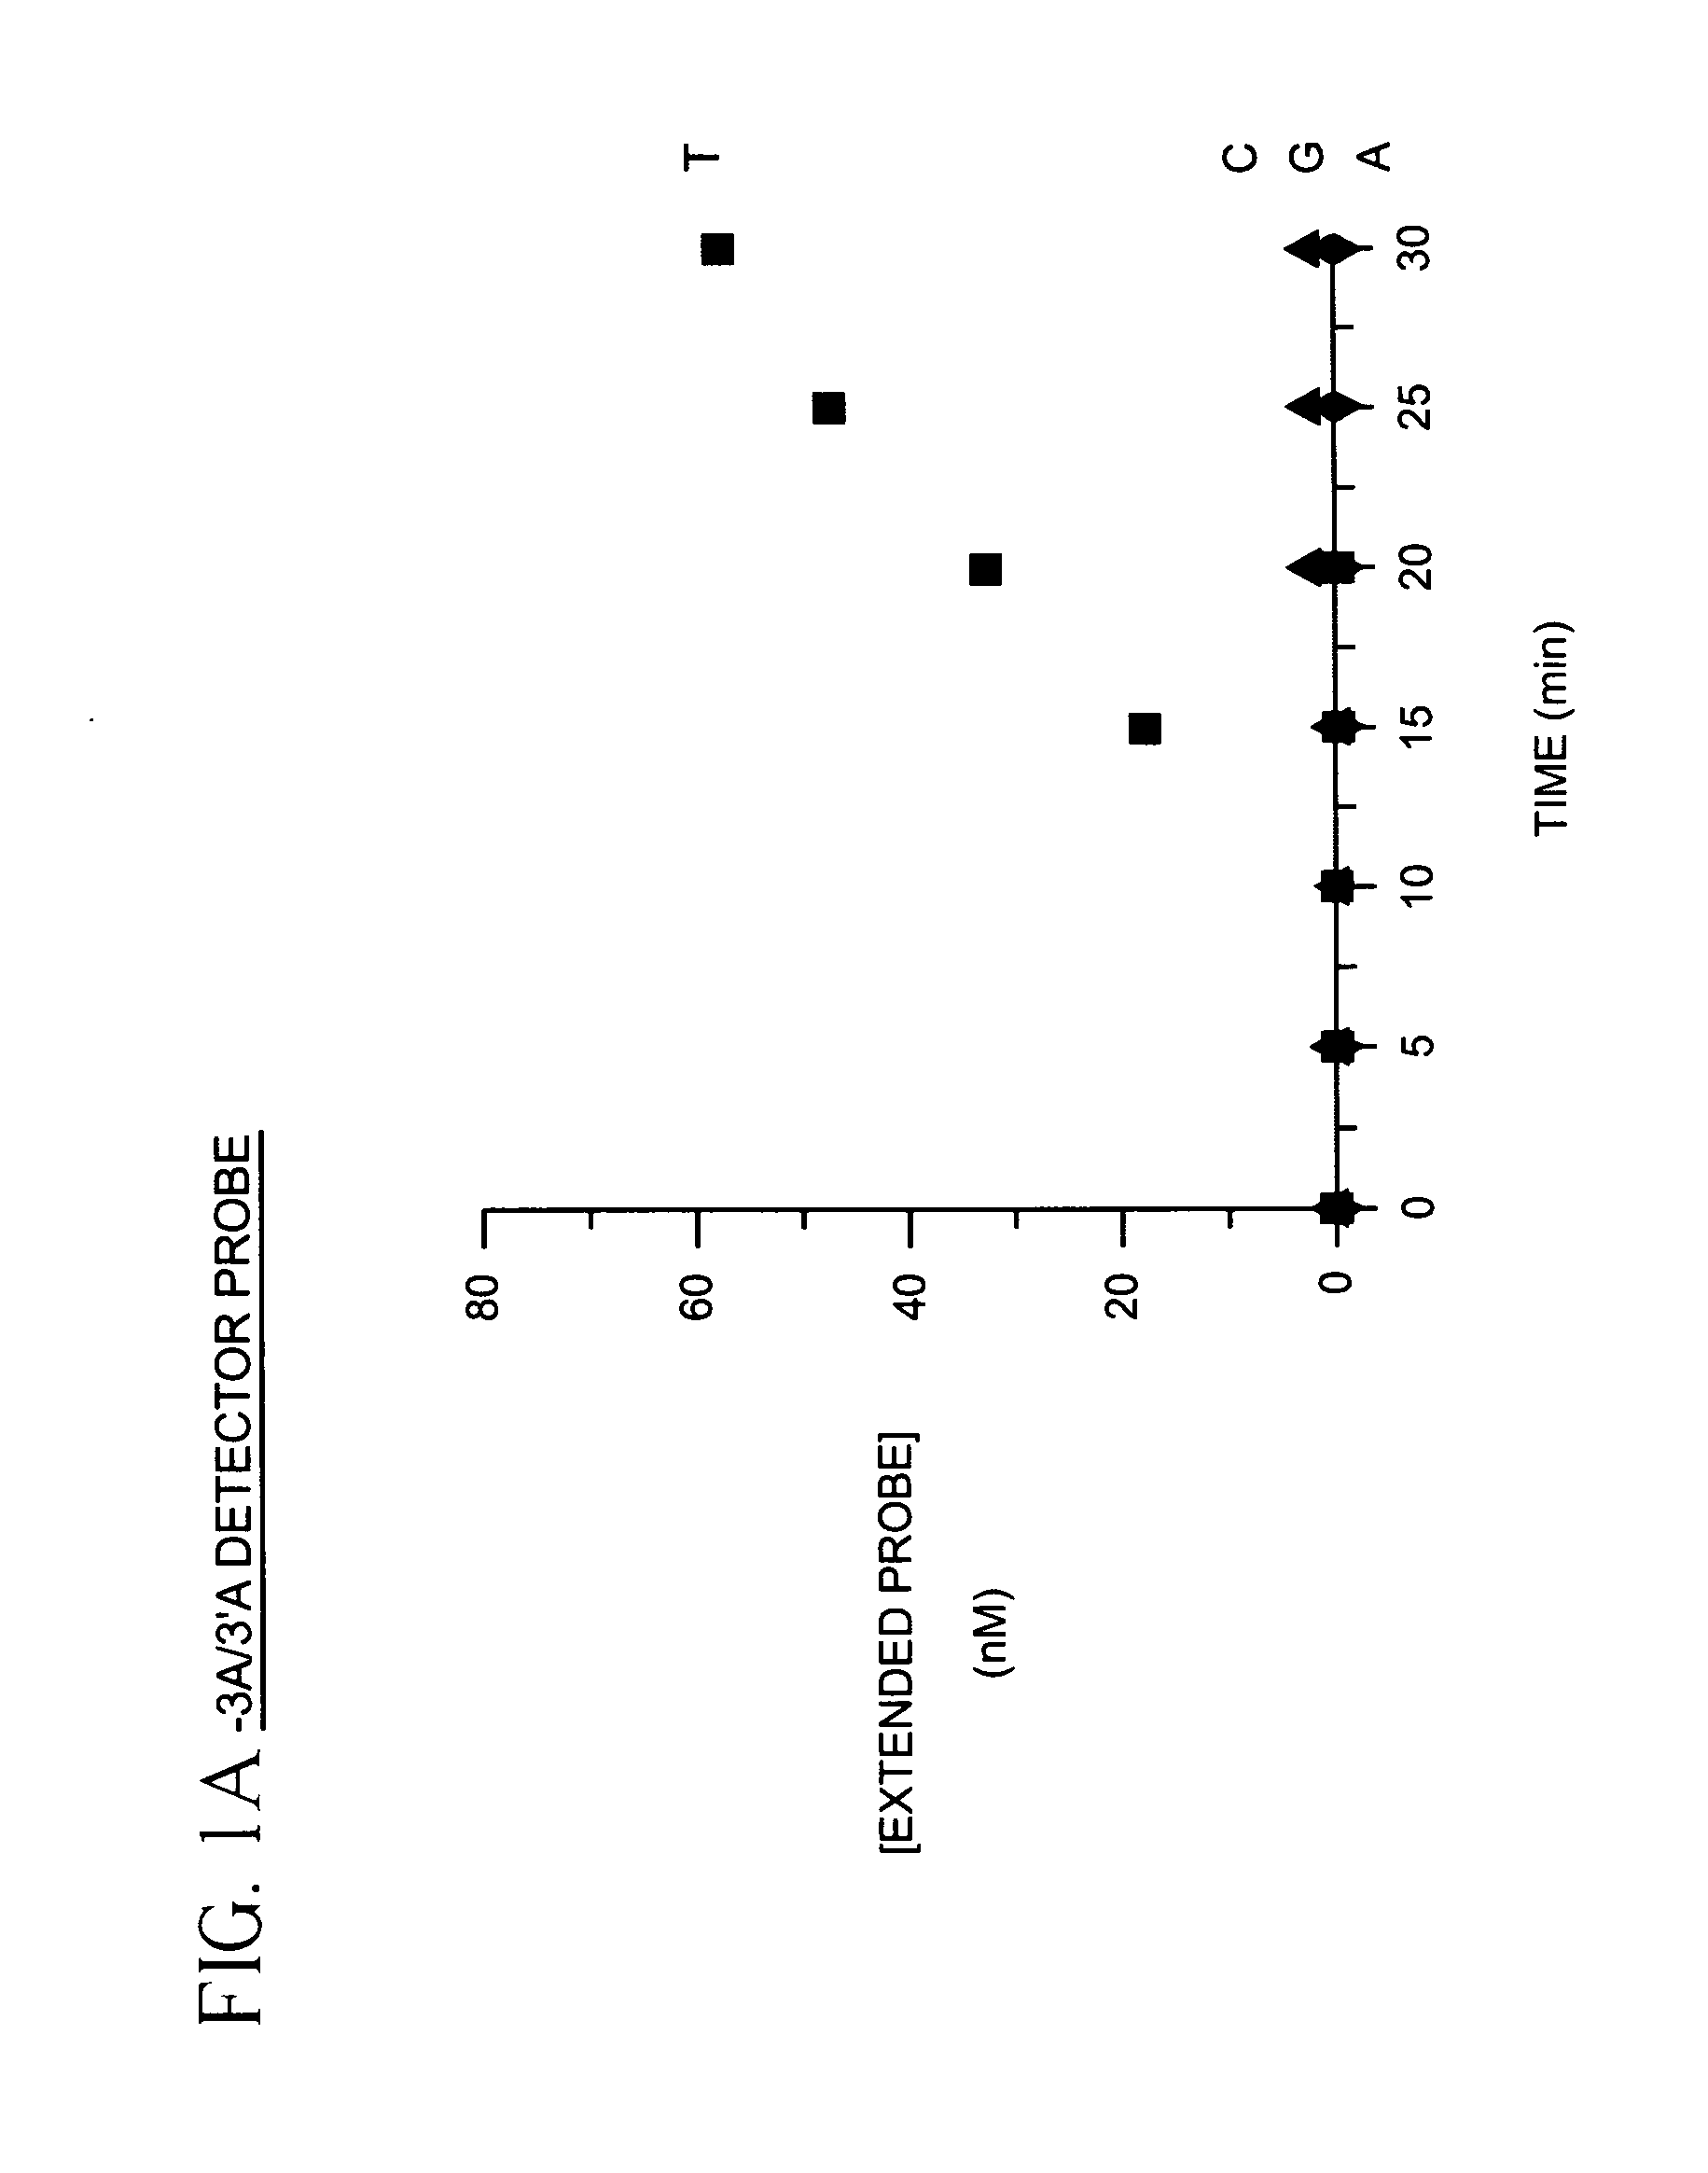 Methods for detecting single nucleotide polymorphisms